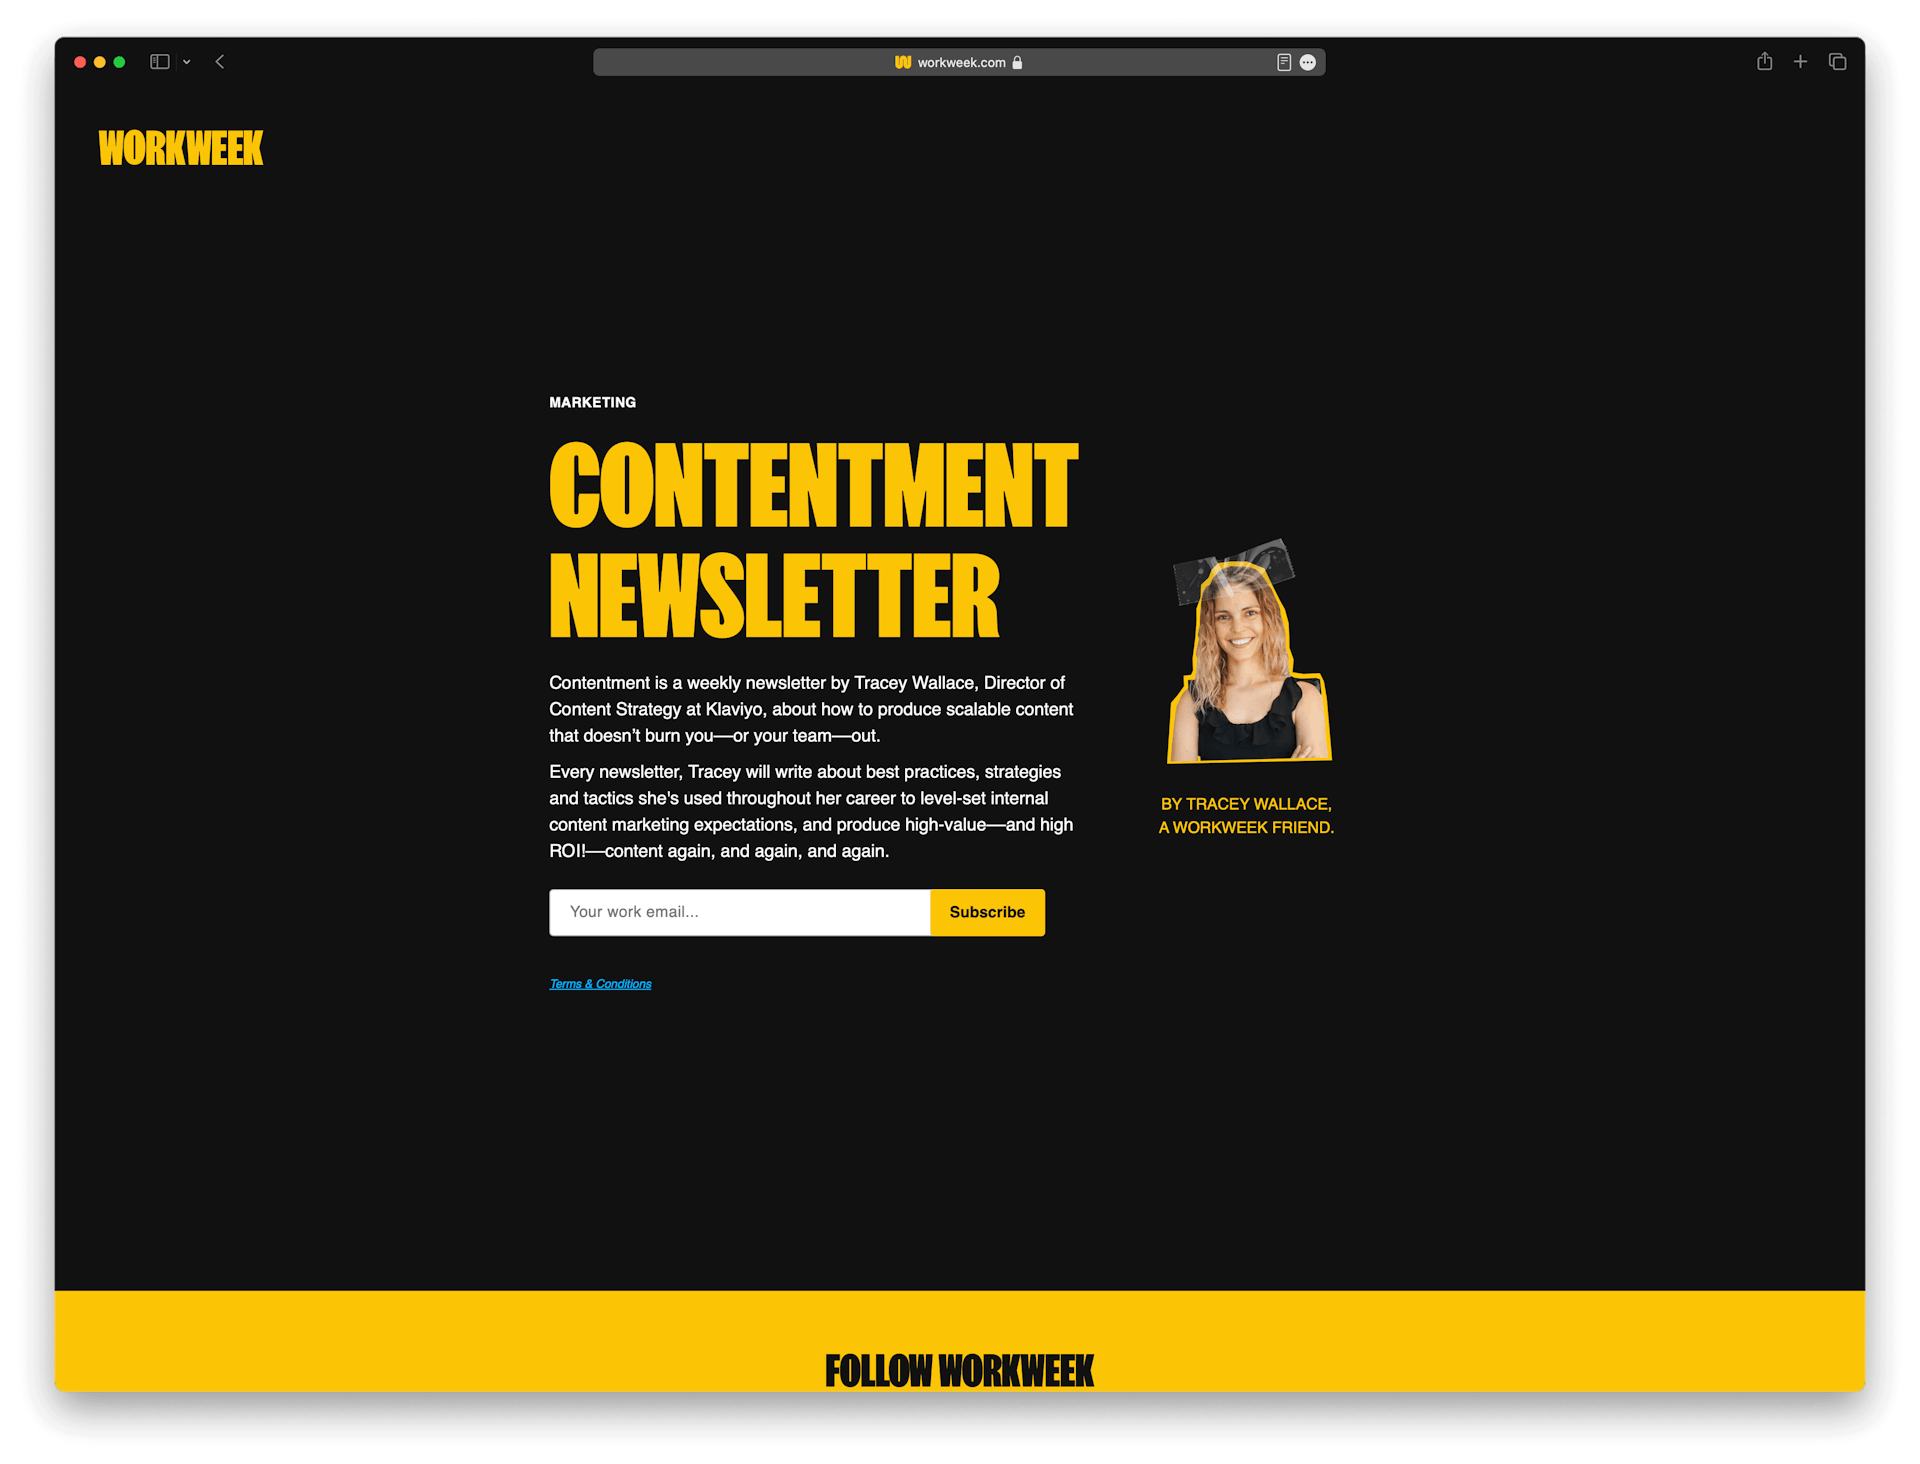 Screenshot example of contentment newsletter